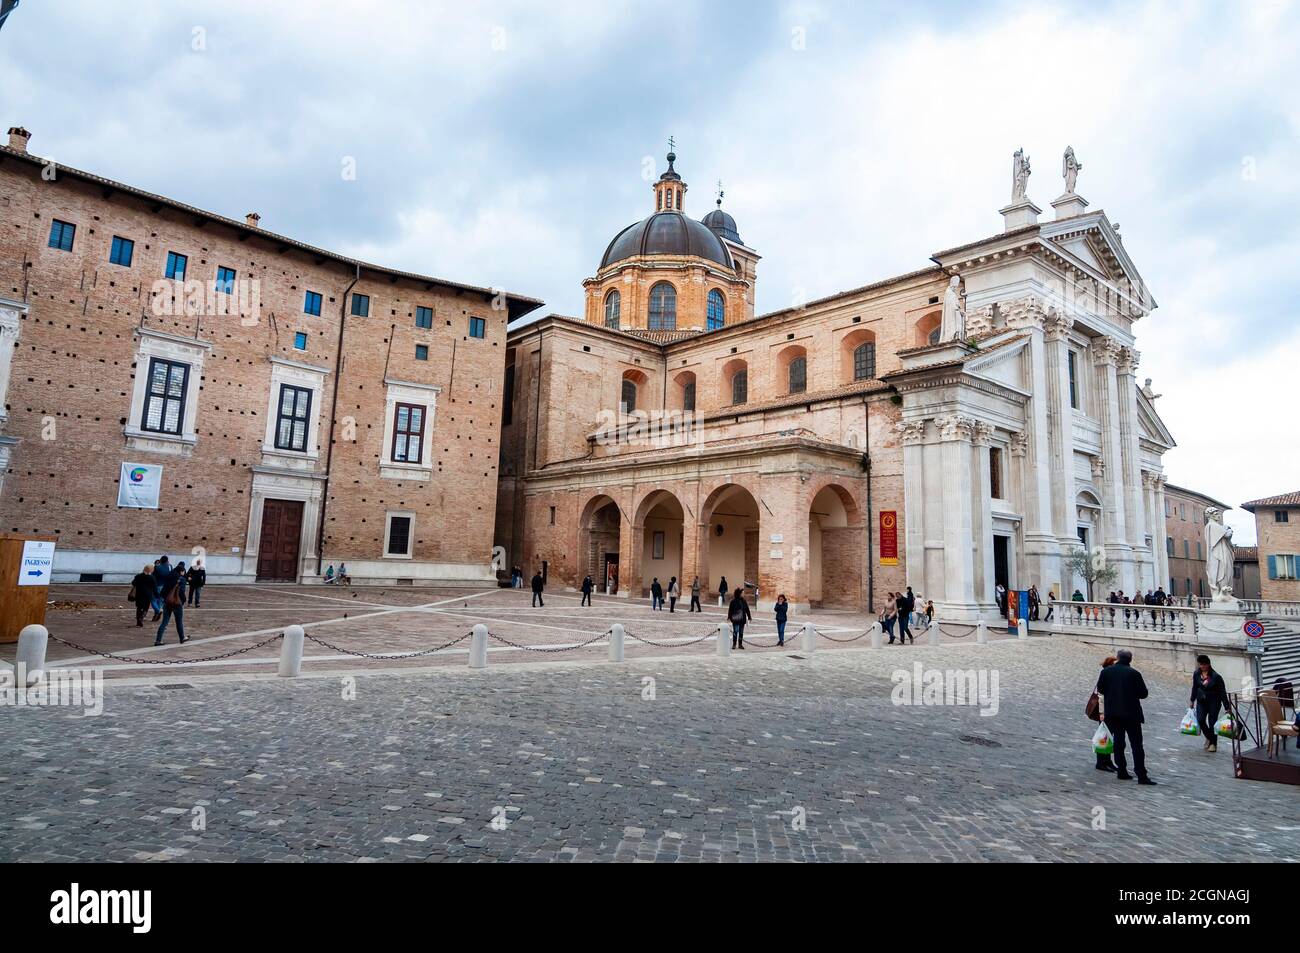 View of the facade and the cupola of the neoclassical Duomo di Urbino, Urbino Cathedral in the Marche region, Italy. Stock Photo